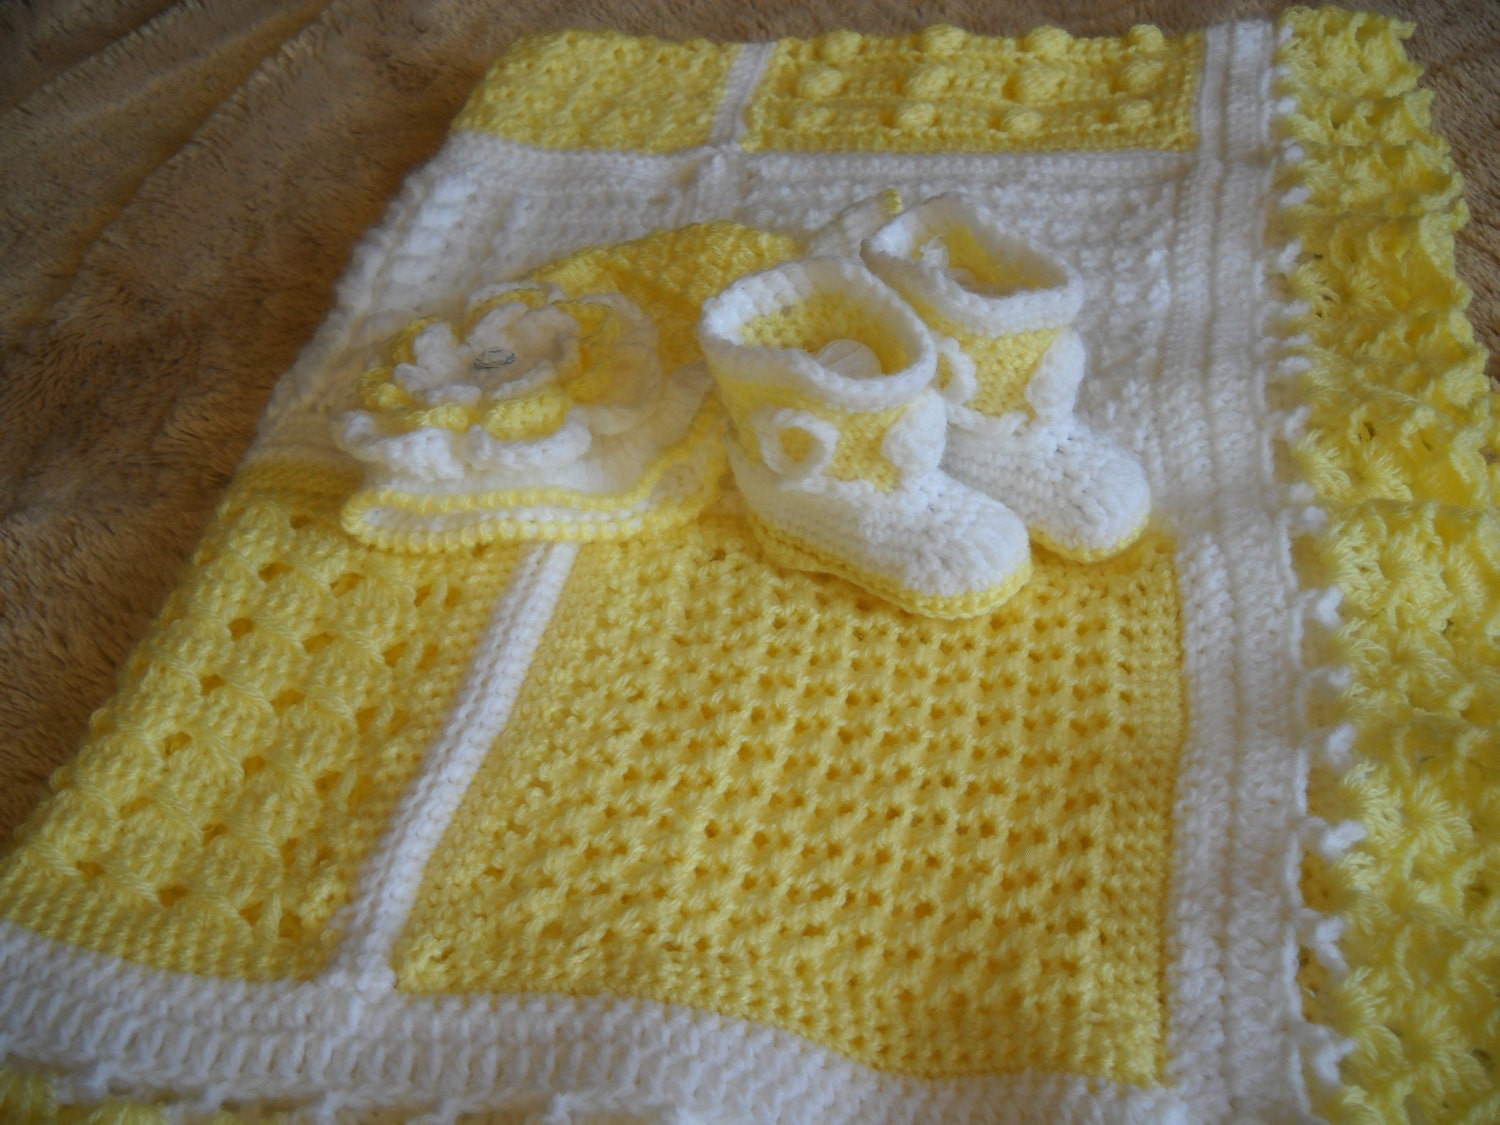 Yellow and White Crocheted Baby Gift Set, Blanket, Hat, and Cowboy(girl) Booties